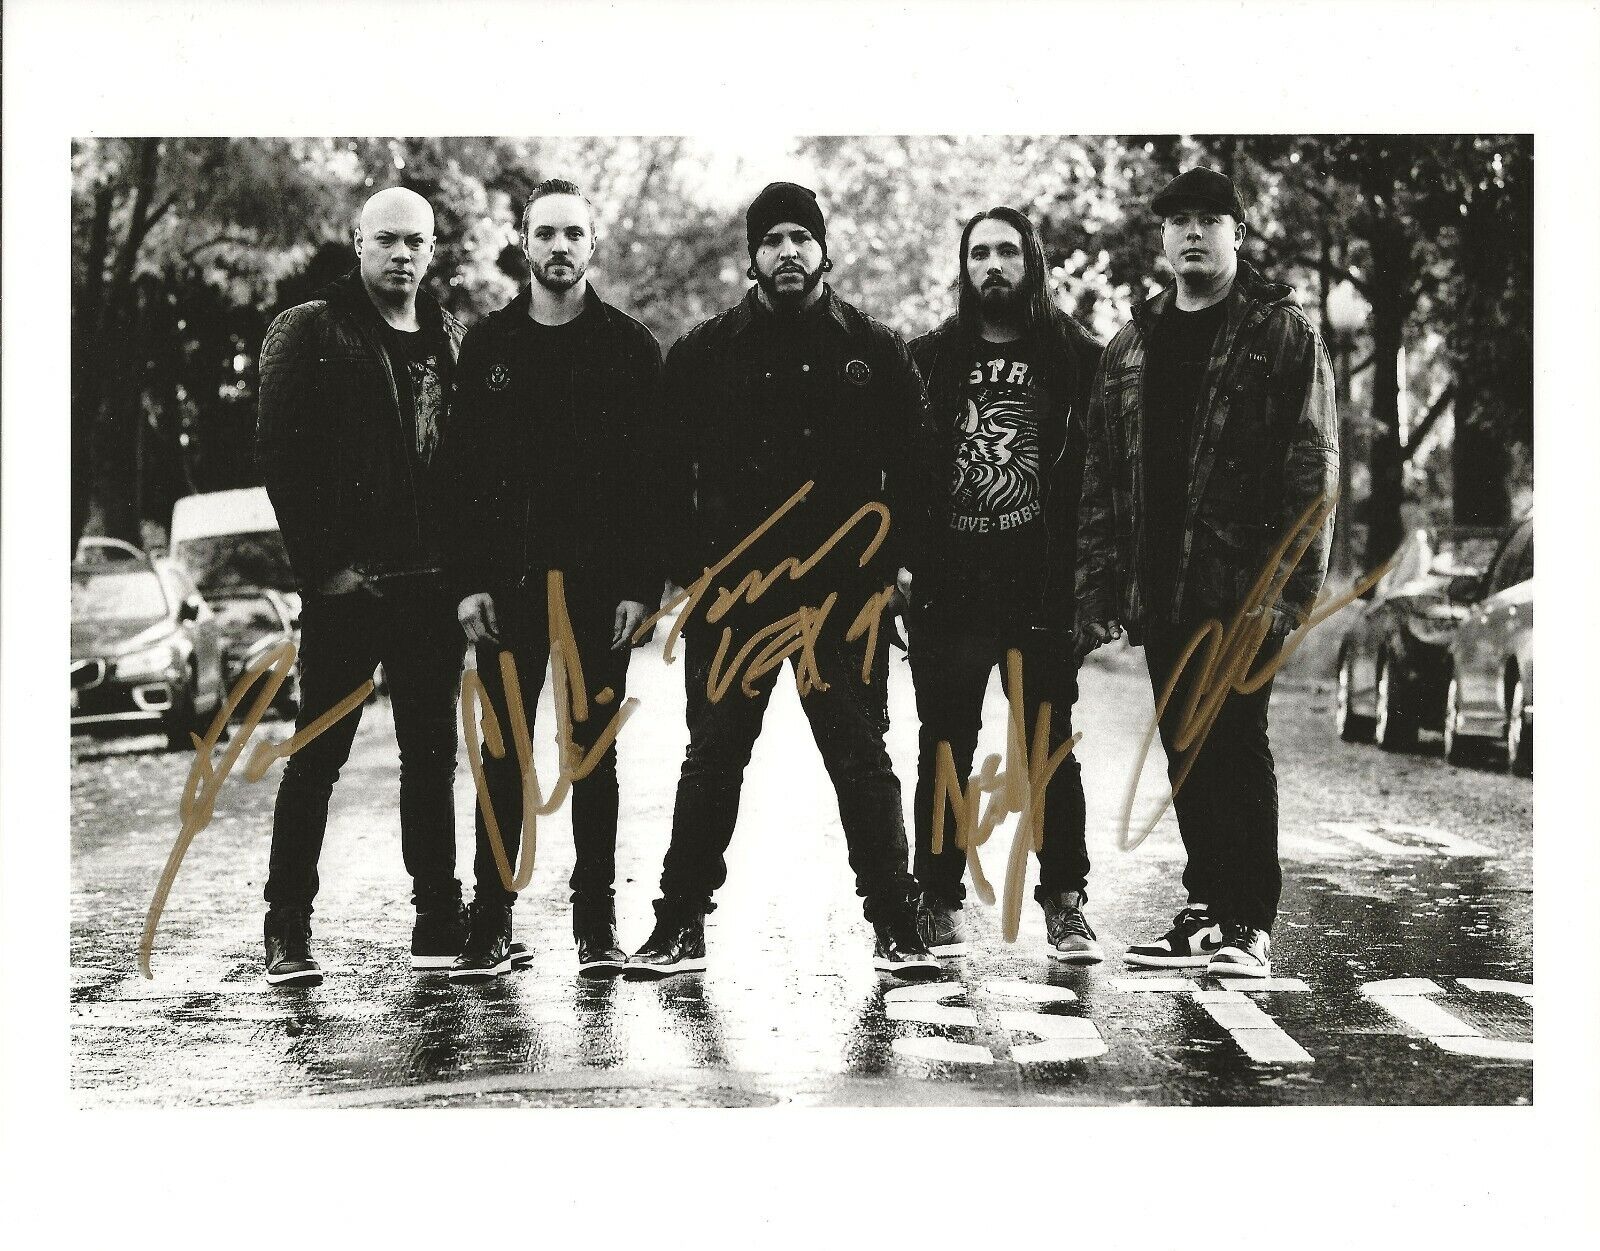 Bad Wolves REAL hand SIGNED 8x10 Photo Poster painting #3 COA Autographed by all 5 members